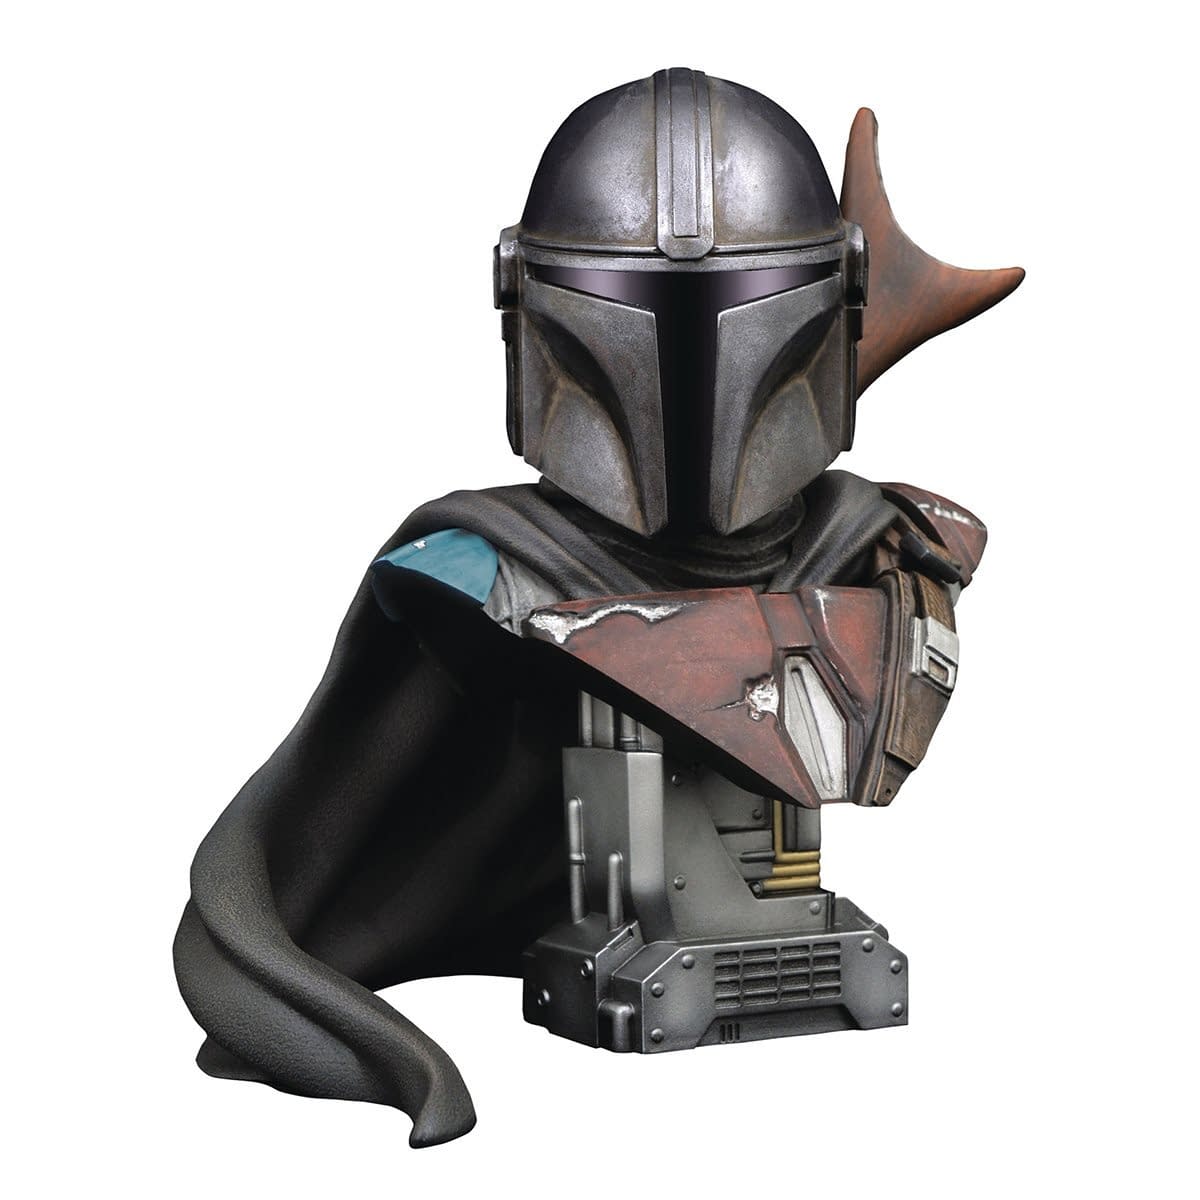 The Rocketeer and Mandalorian Get New a Busts from Diamond